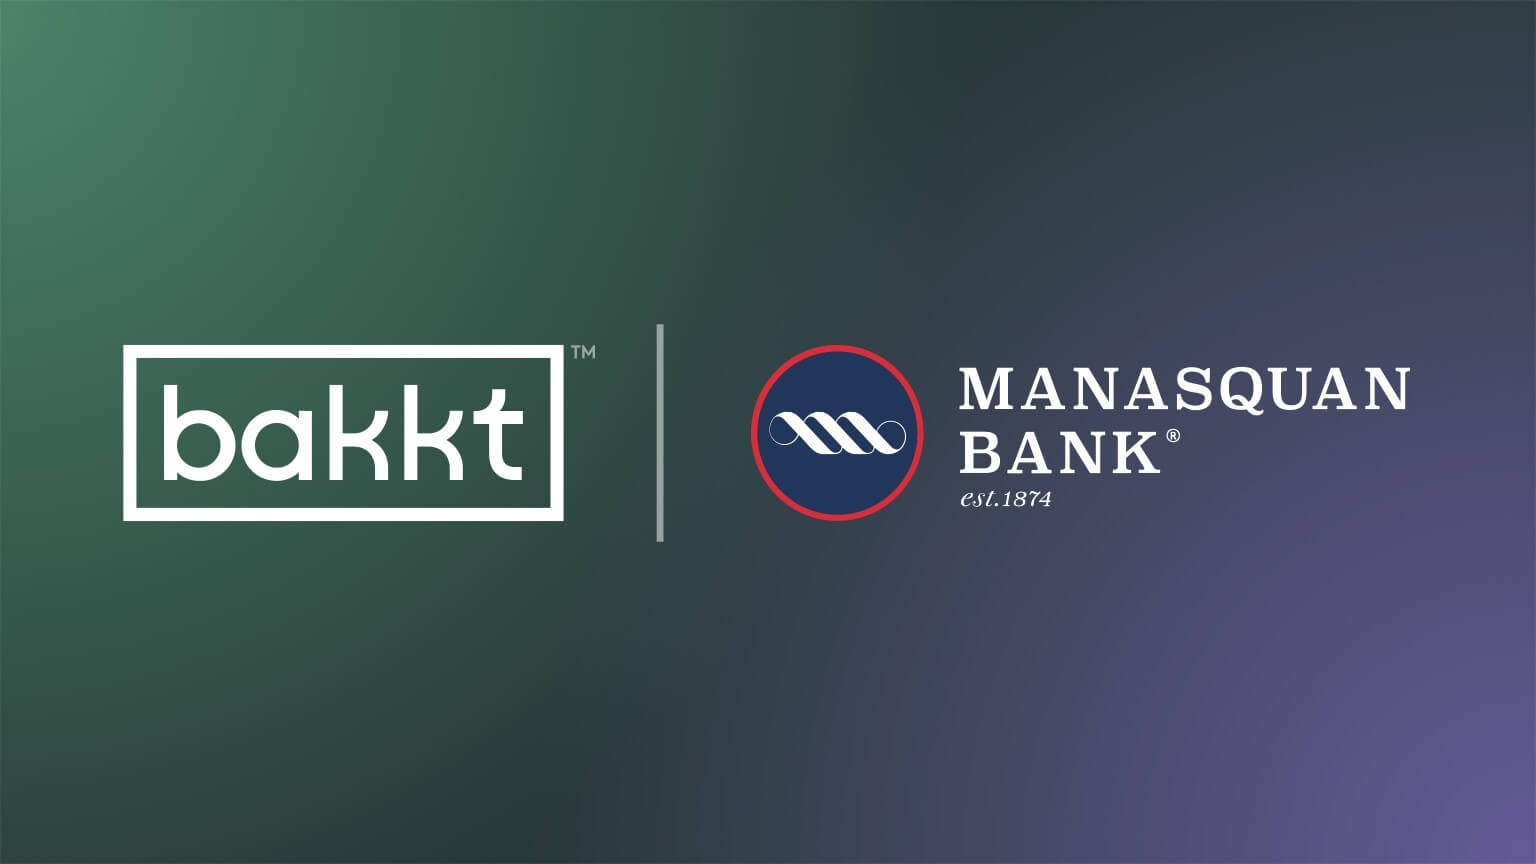 Manasquan Bank selects Bakkt to Offer Retail Clients Access to Cryptocurrency